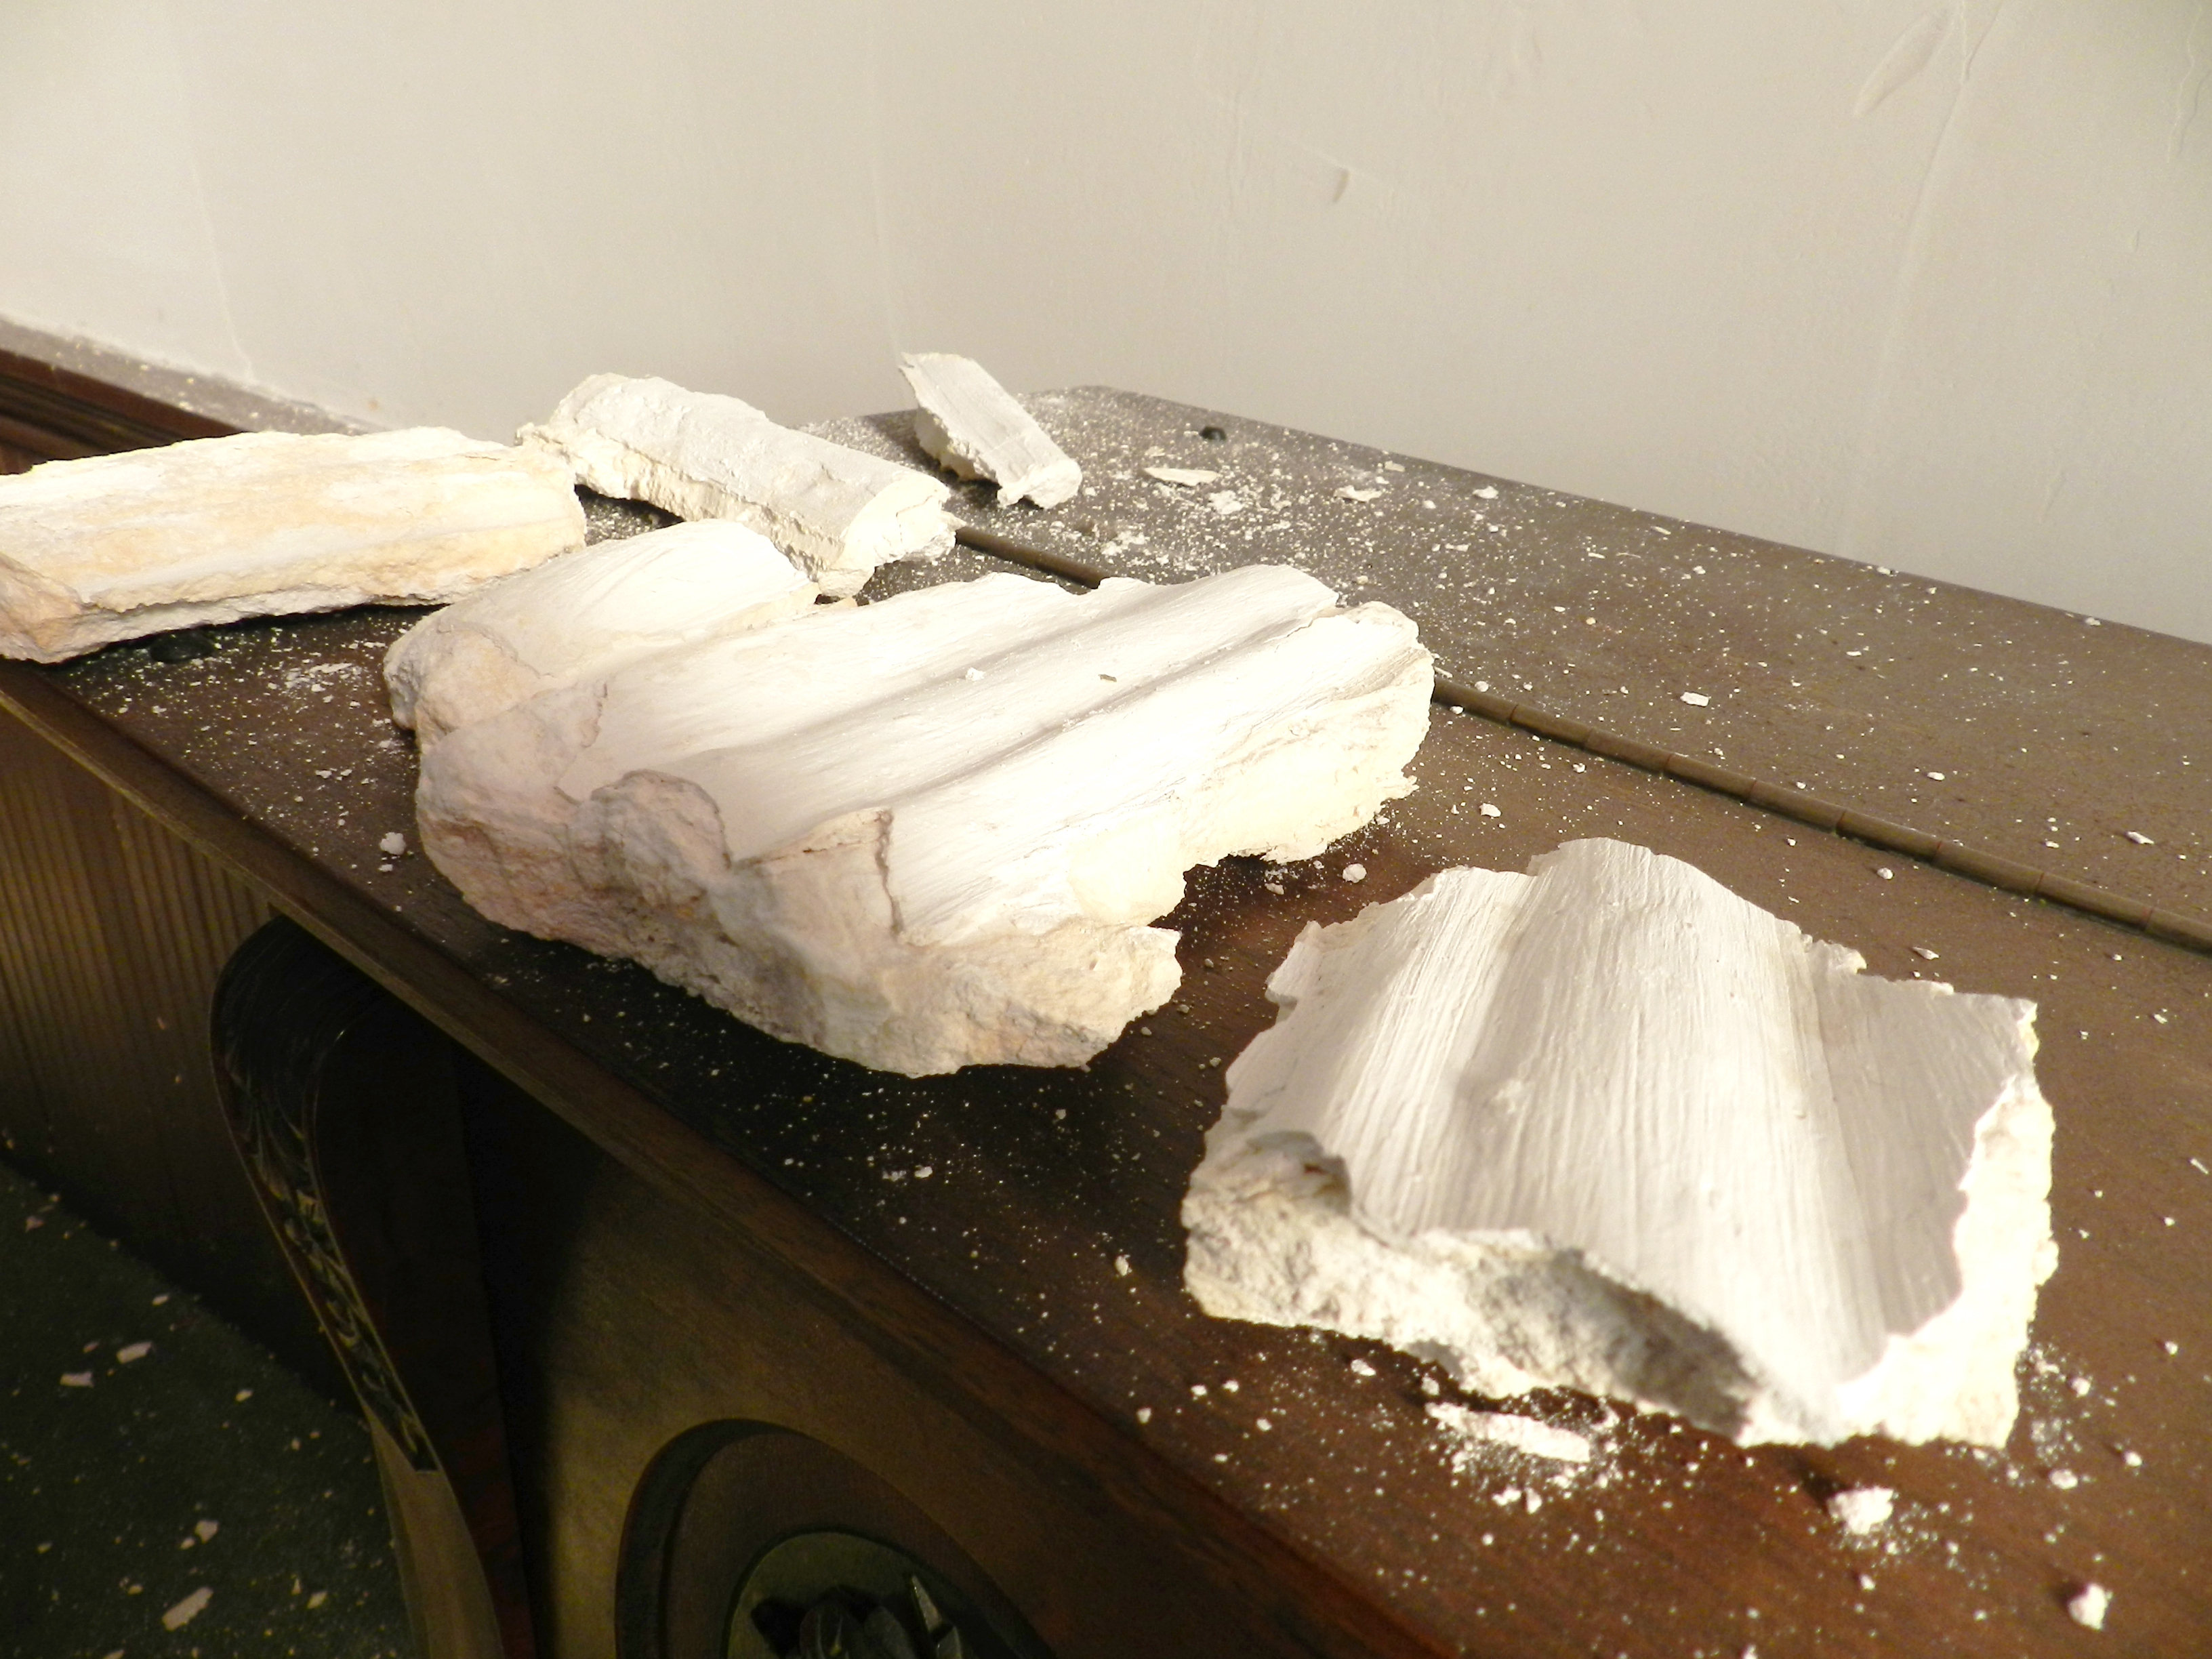 Five big pieces of white plaster chunks on a table.